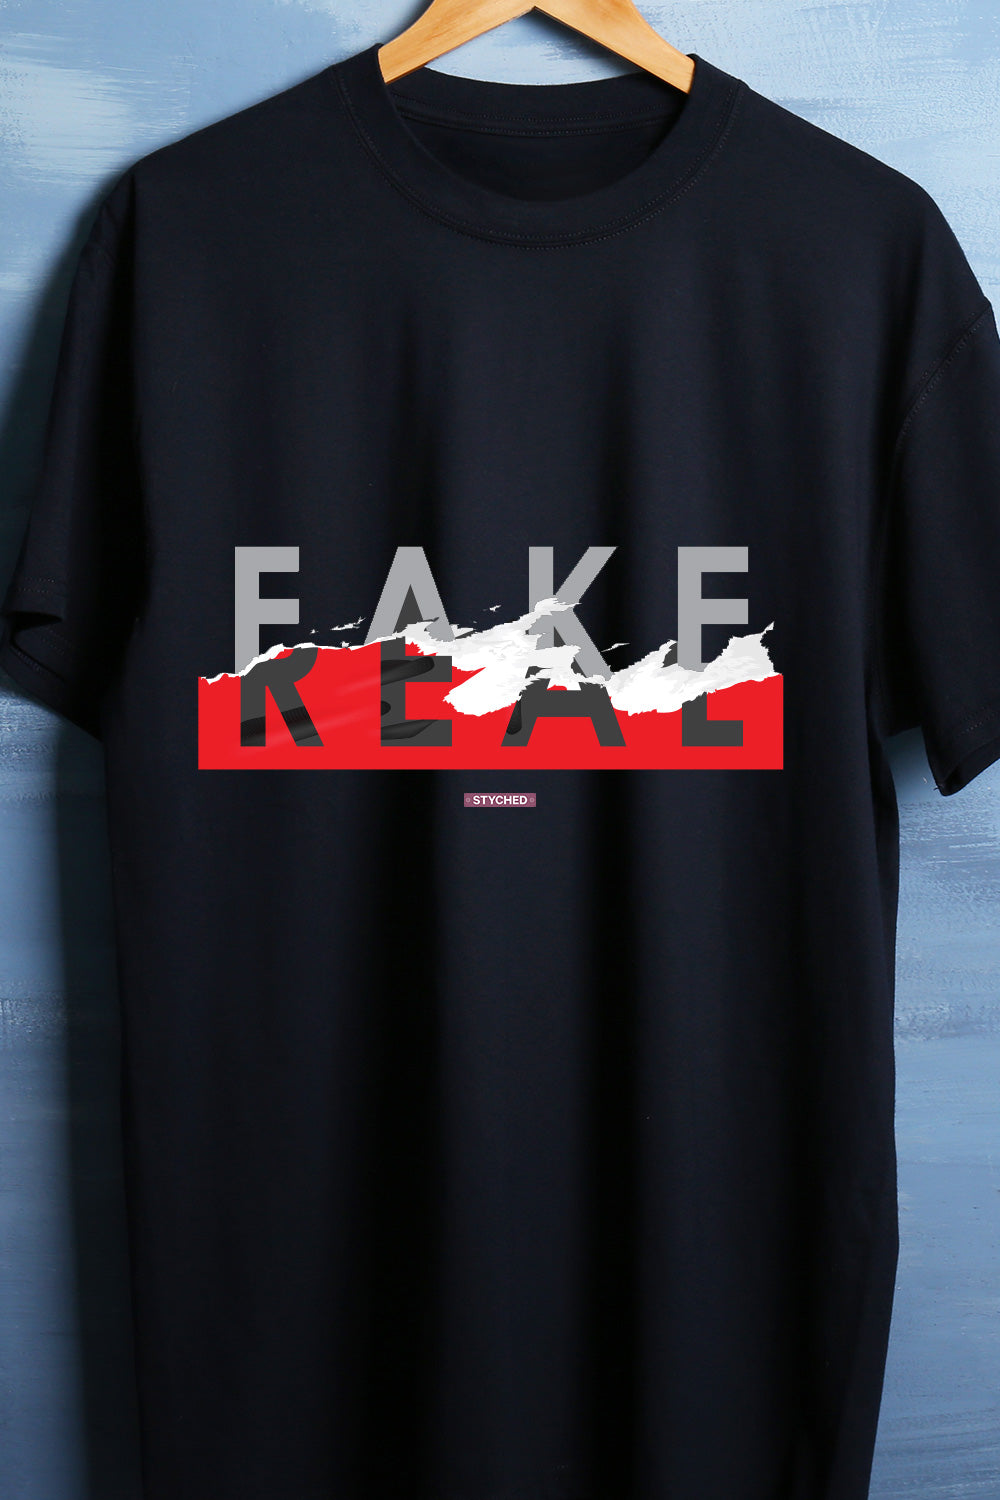 Fake or Real - Torn effect graphic tee black color round neck